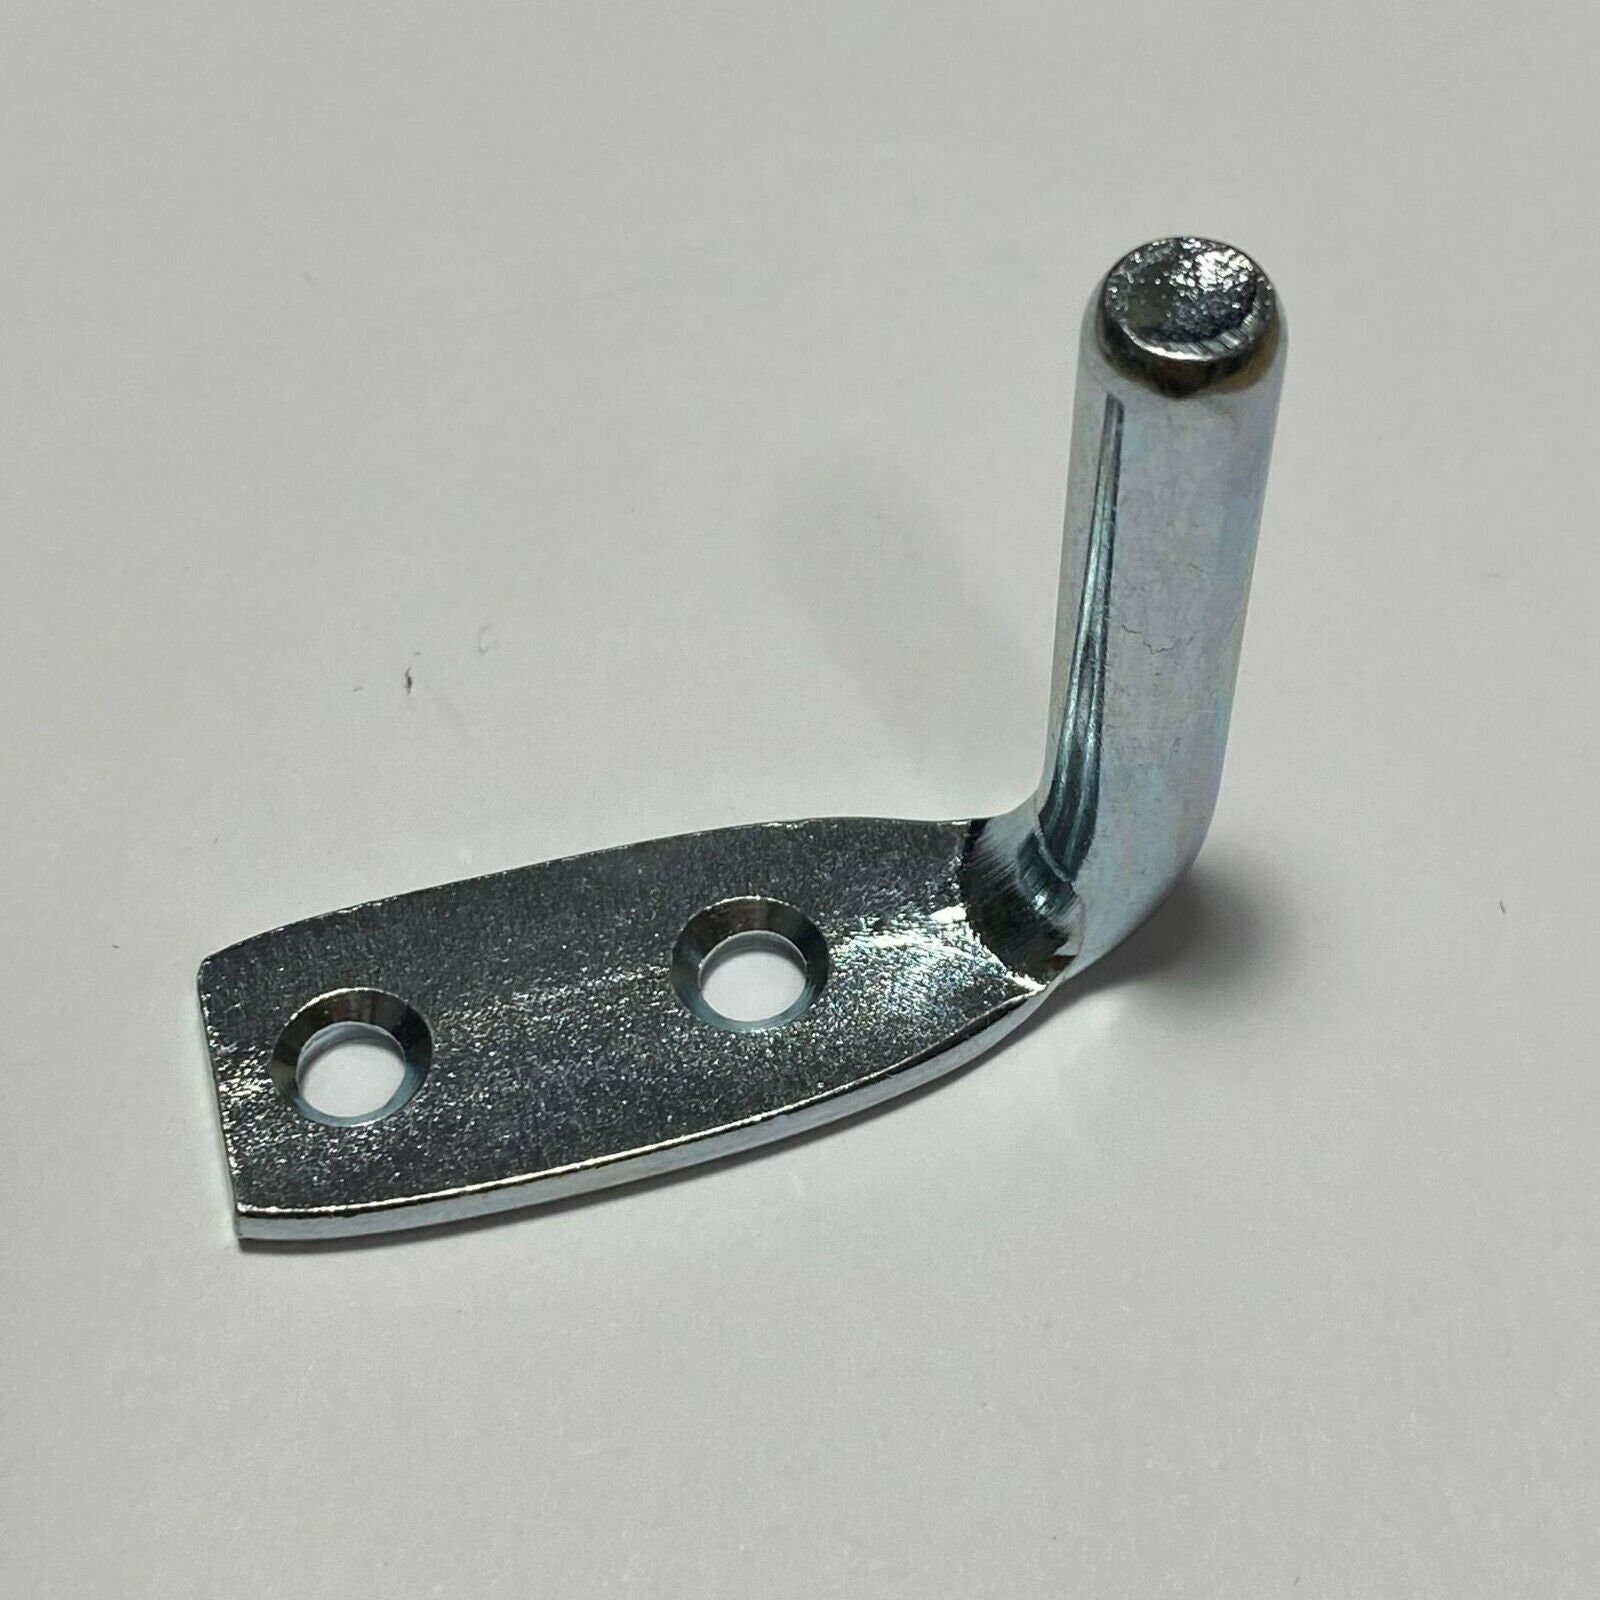 1 x IKEA # 117363 New Stop Lock Catch Pin For Ikea Sofas Replacement Part 